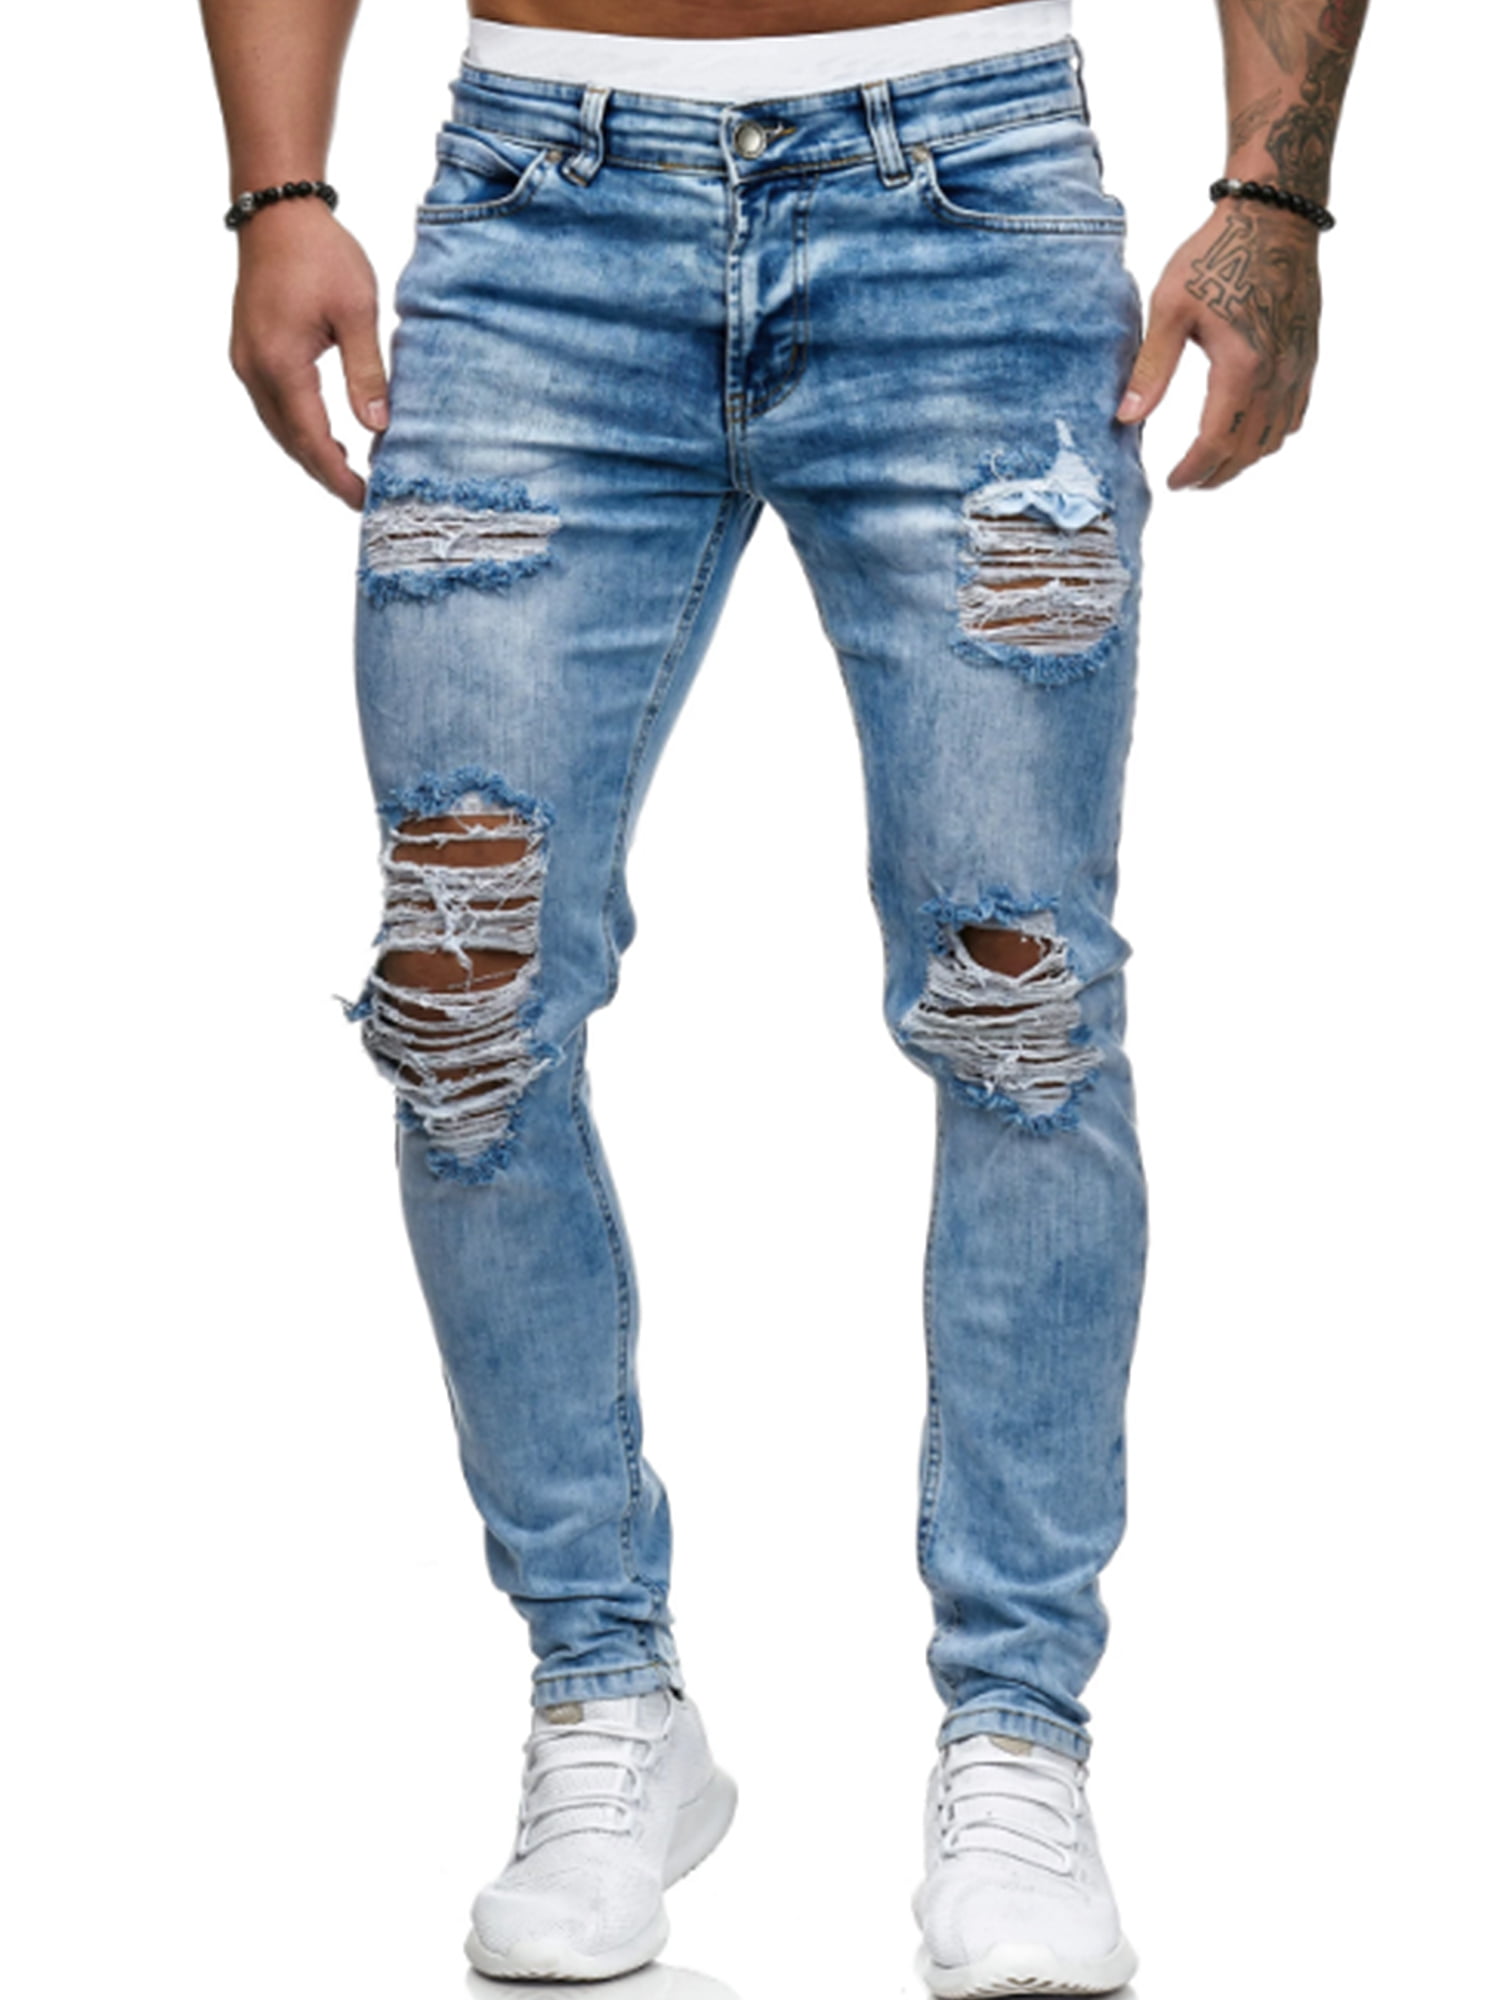 YKARITIANNA Mens Swaggy Destroyed Taped Slim Fit Denim Pants Stretchy Ripped Skinny Biker Jeans Trousers